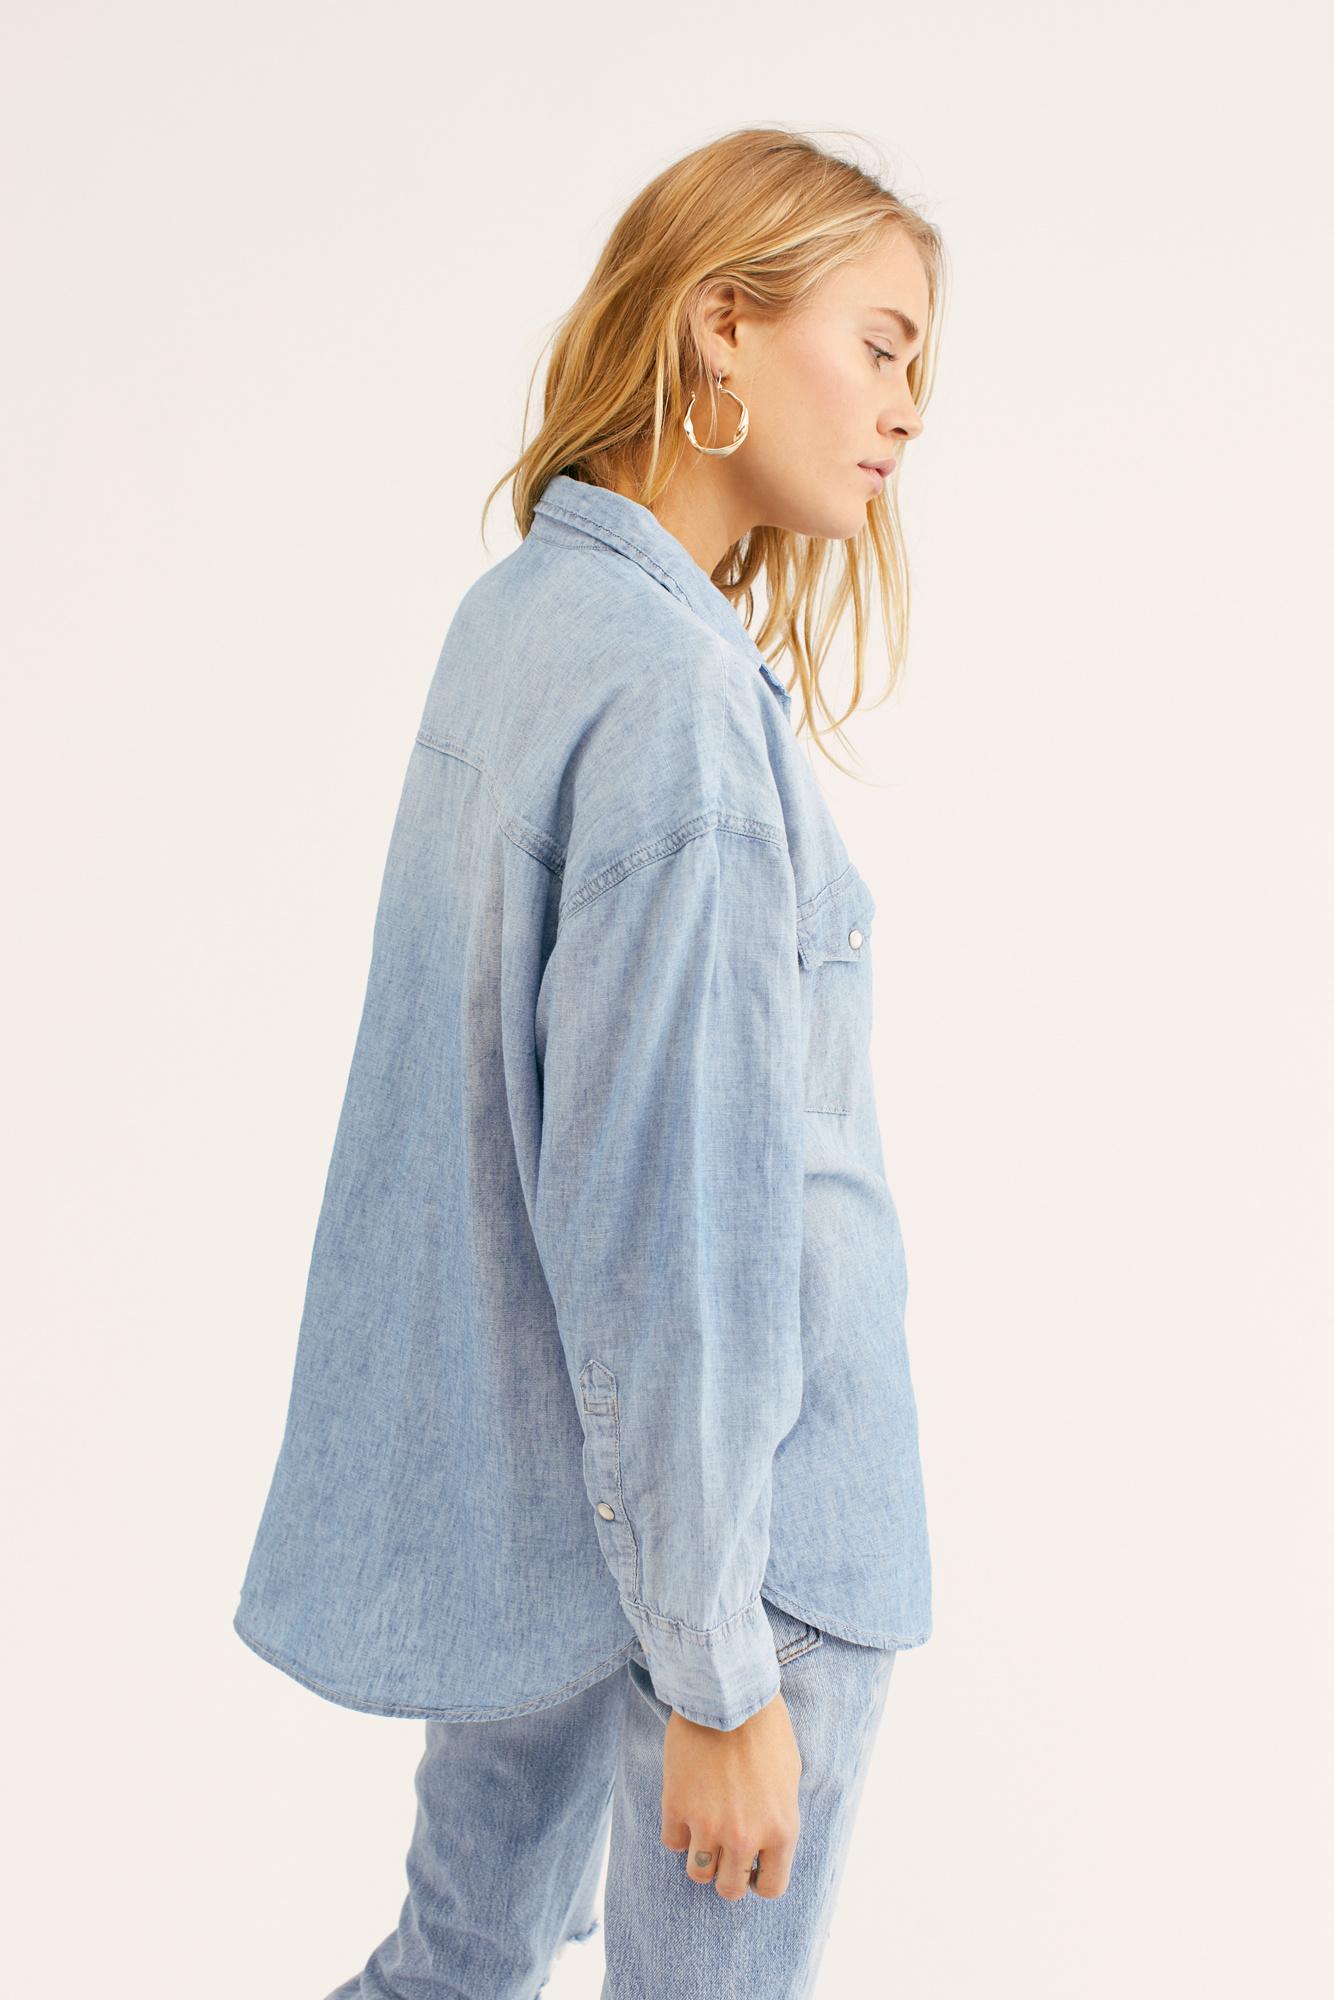 Free People Cotton Levi's Gwen Shirt in 